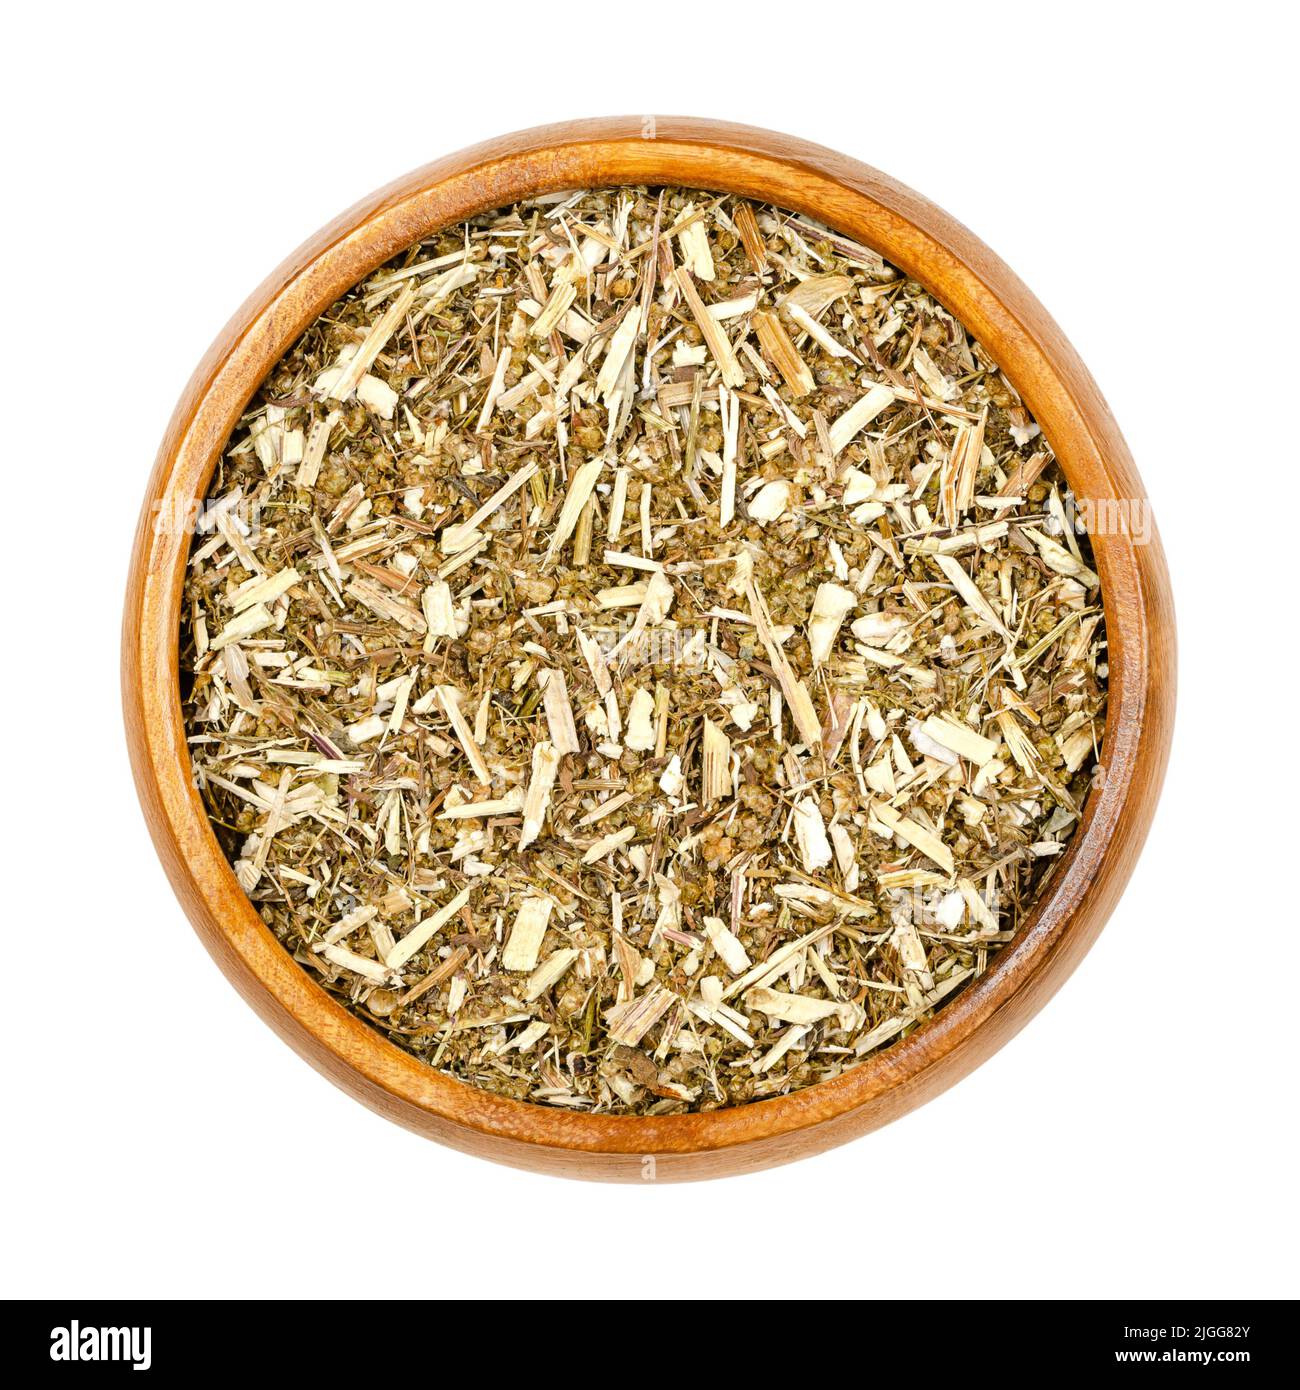 Sweet wormwood, dried herb, Artemisia annua in wooden bowl. The discovery of the plant extract artemisinin is a Nobel prize awarded medication. Stock Photo